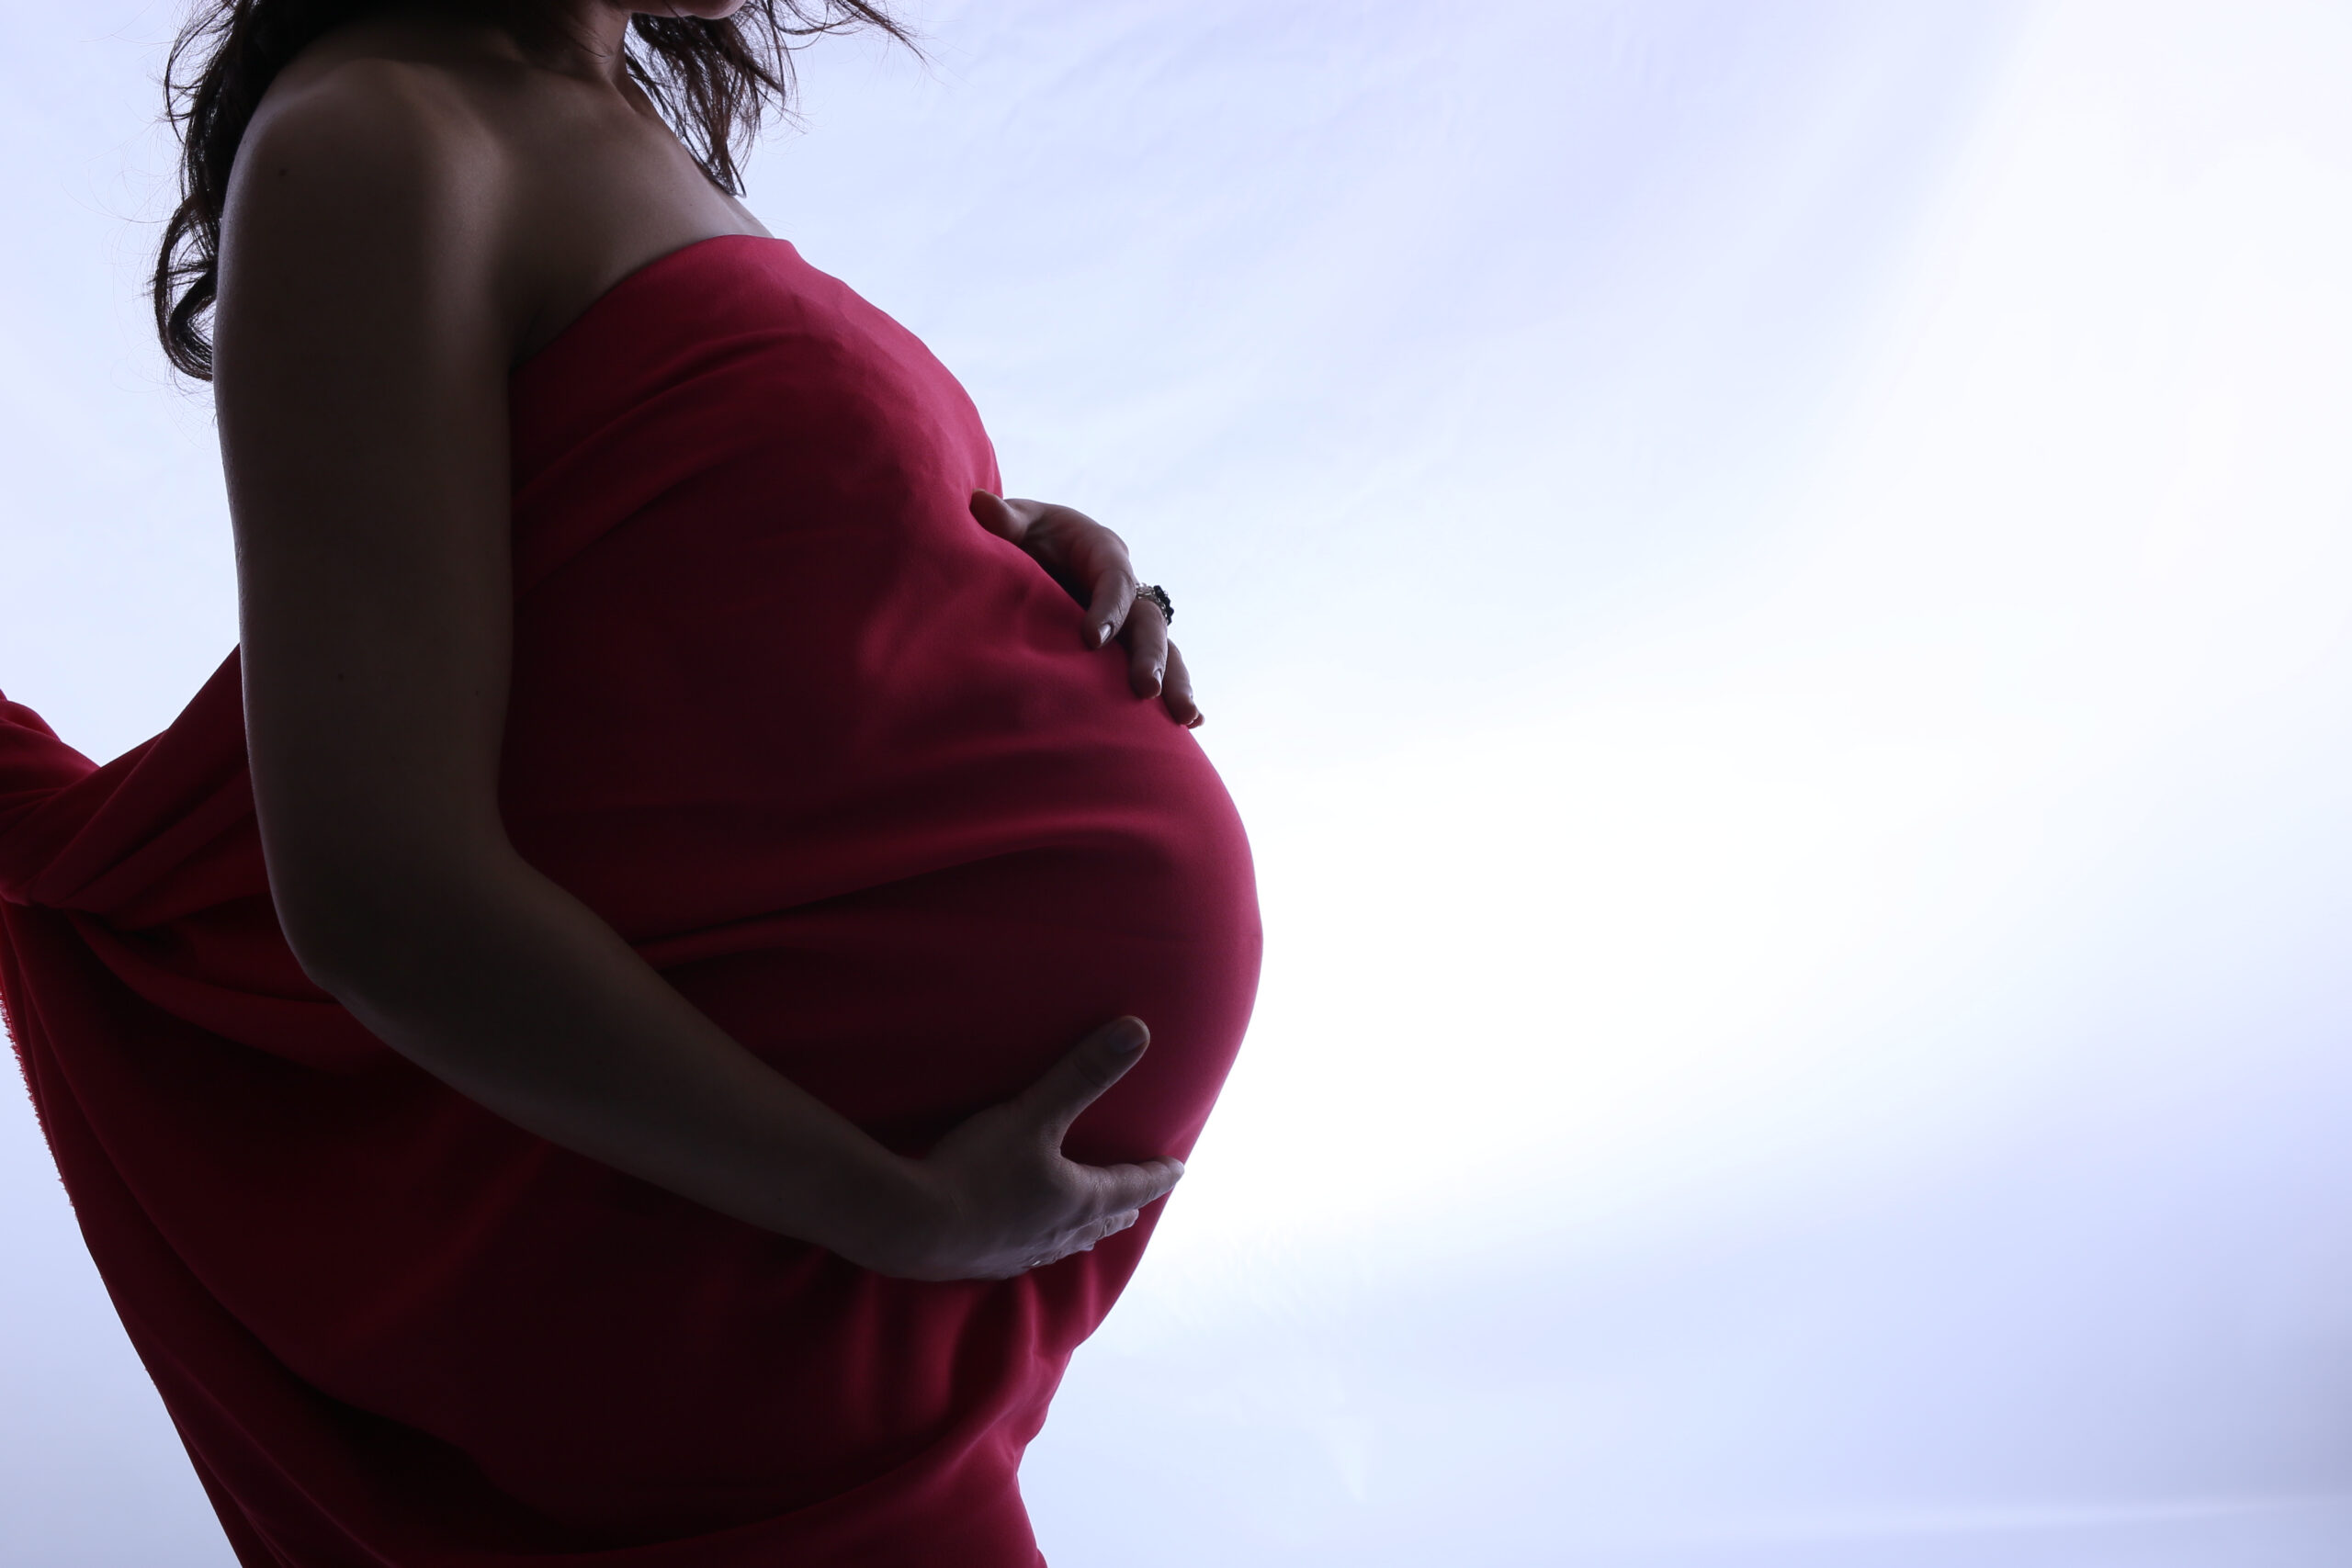 Stock image of a Black pregnant woman holding her belly